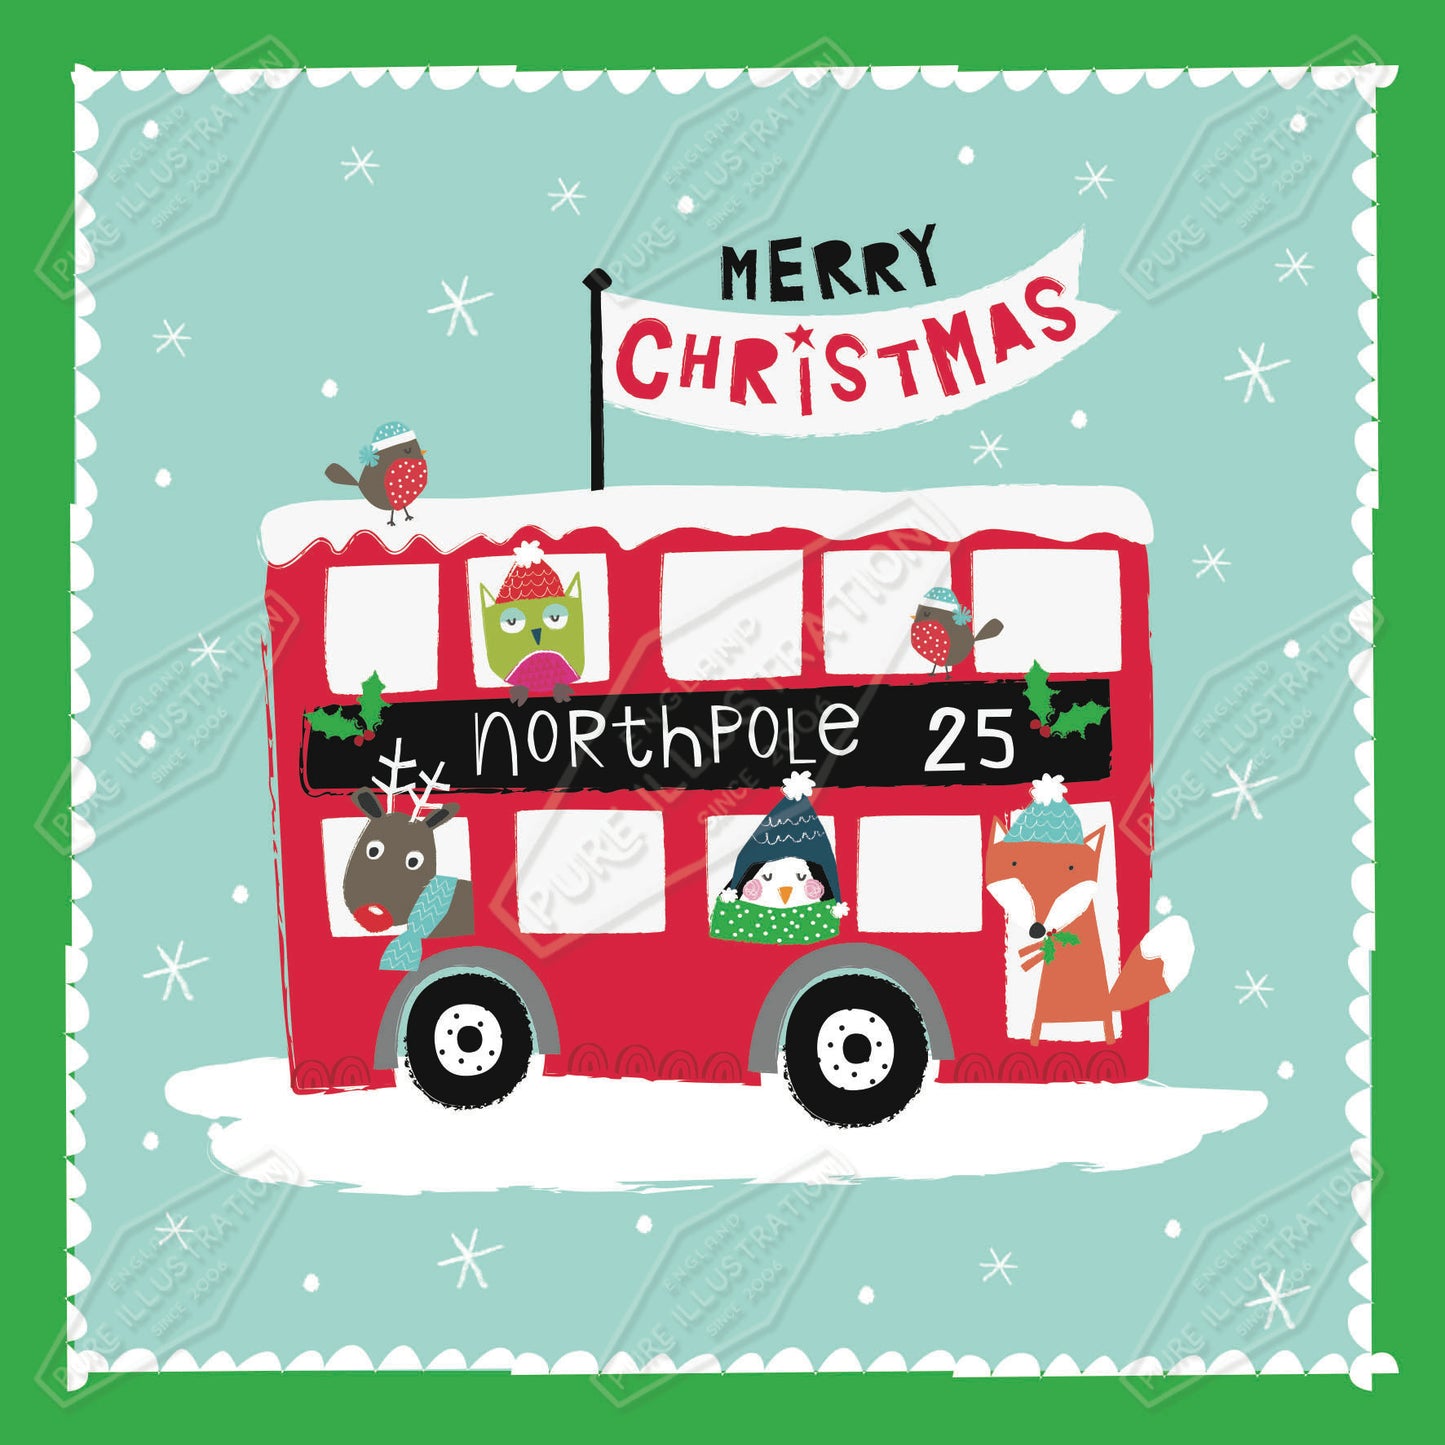 00035417IMC- Isla McDonald is represented by Pure Art Licensing Agency - Christmas Greeting Card Design